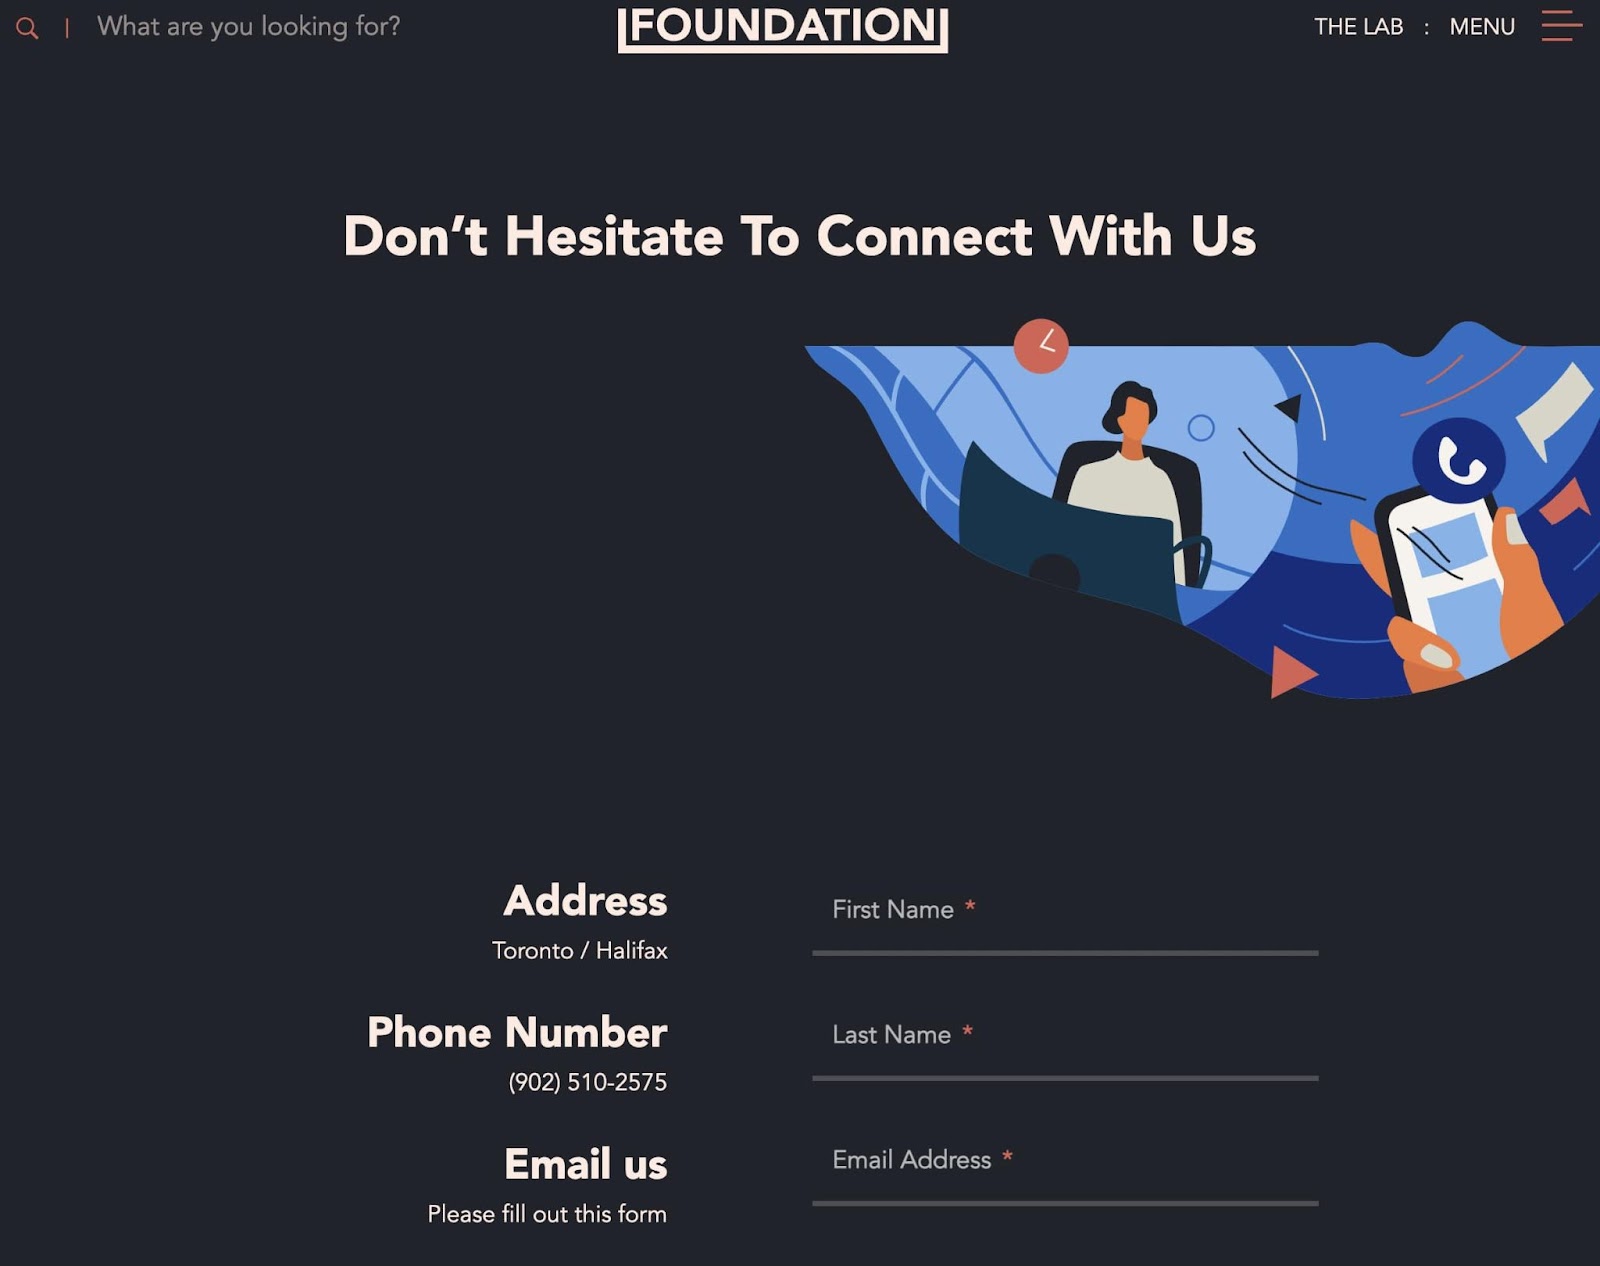 Foundation contact page